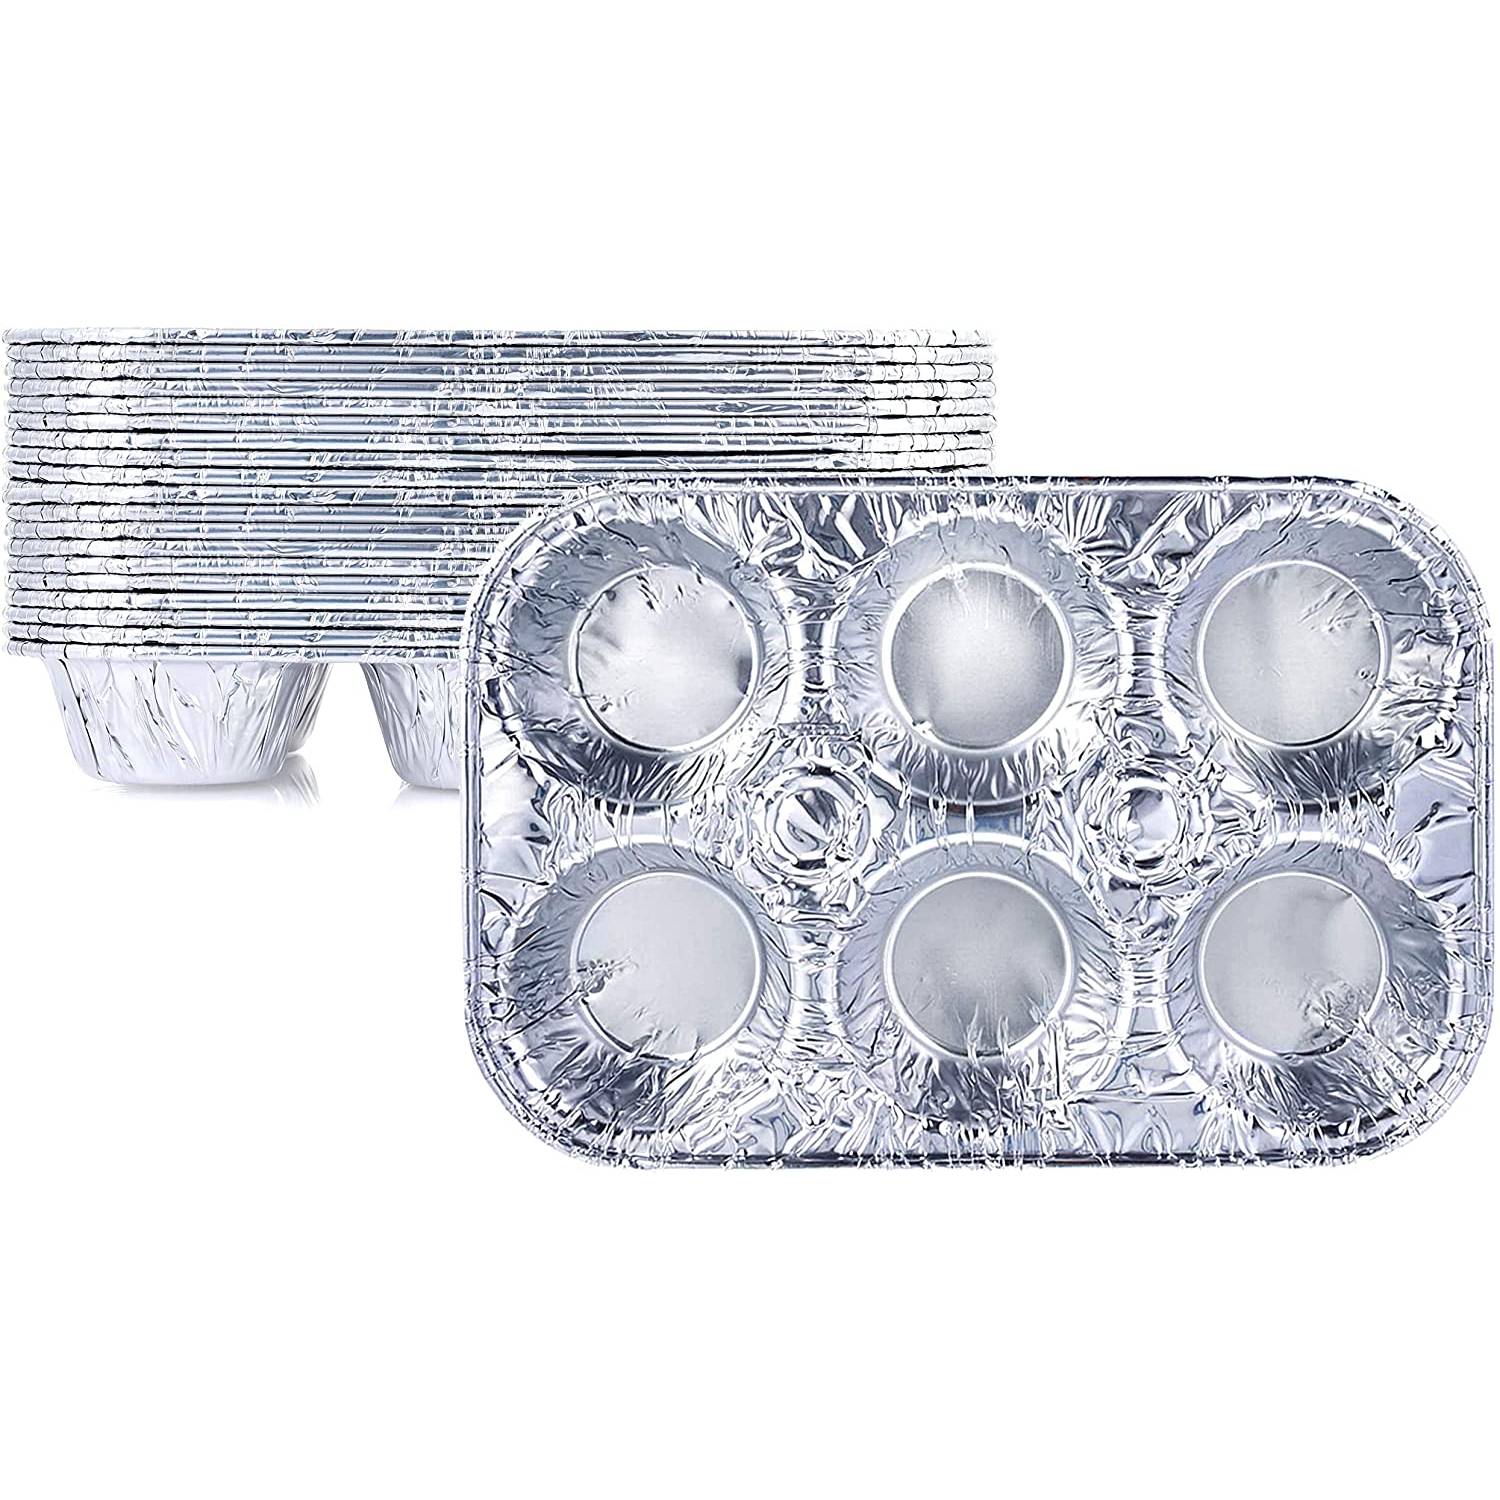 Disposable Aluminum Muffin Foil Pan 6 Cups Disposable Nicole Collection   